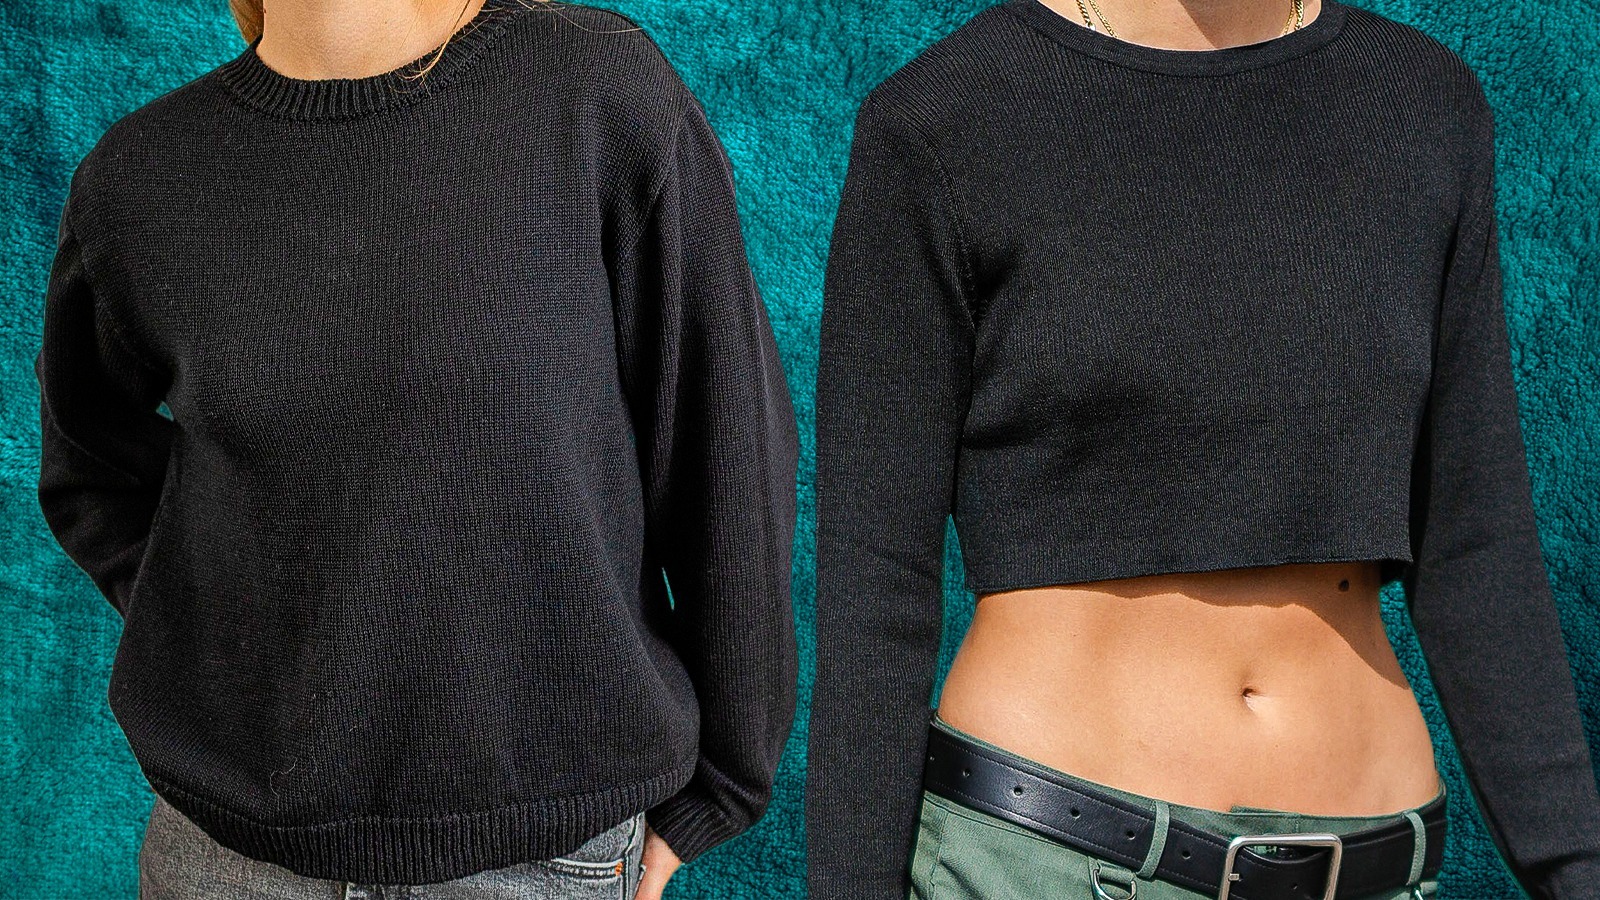 STOP BUNCHING YOUR SWEATER INTO YOUR BRA OR BELT TO CROP TOP